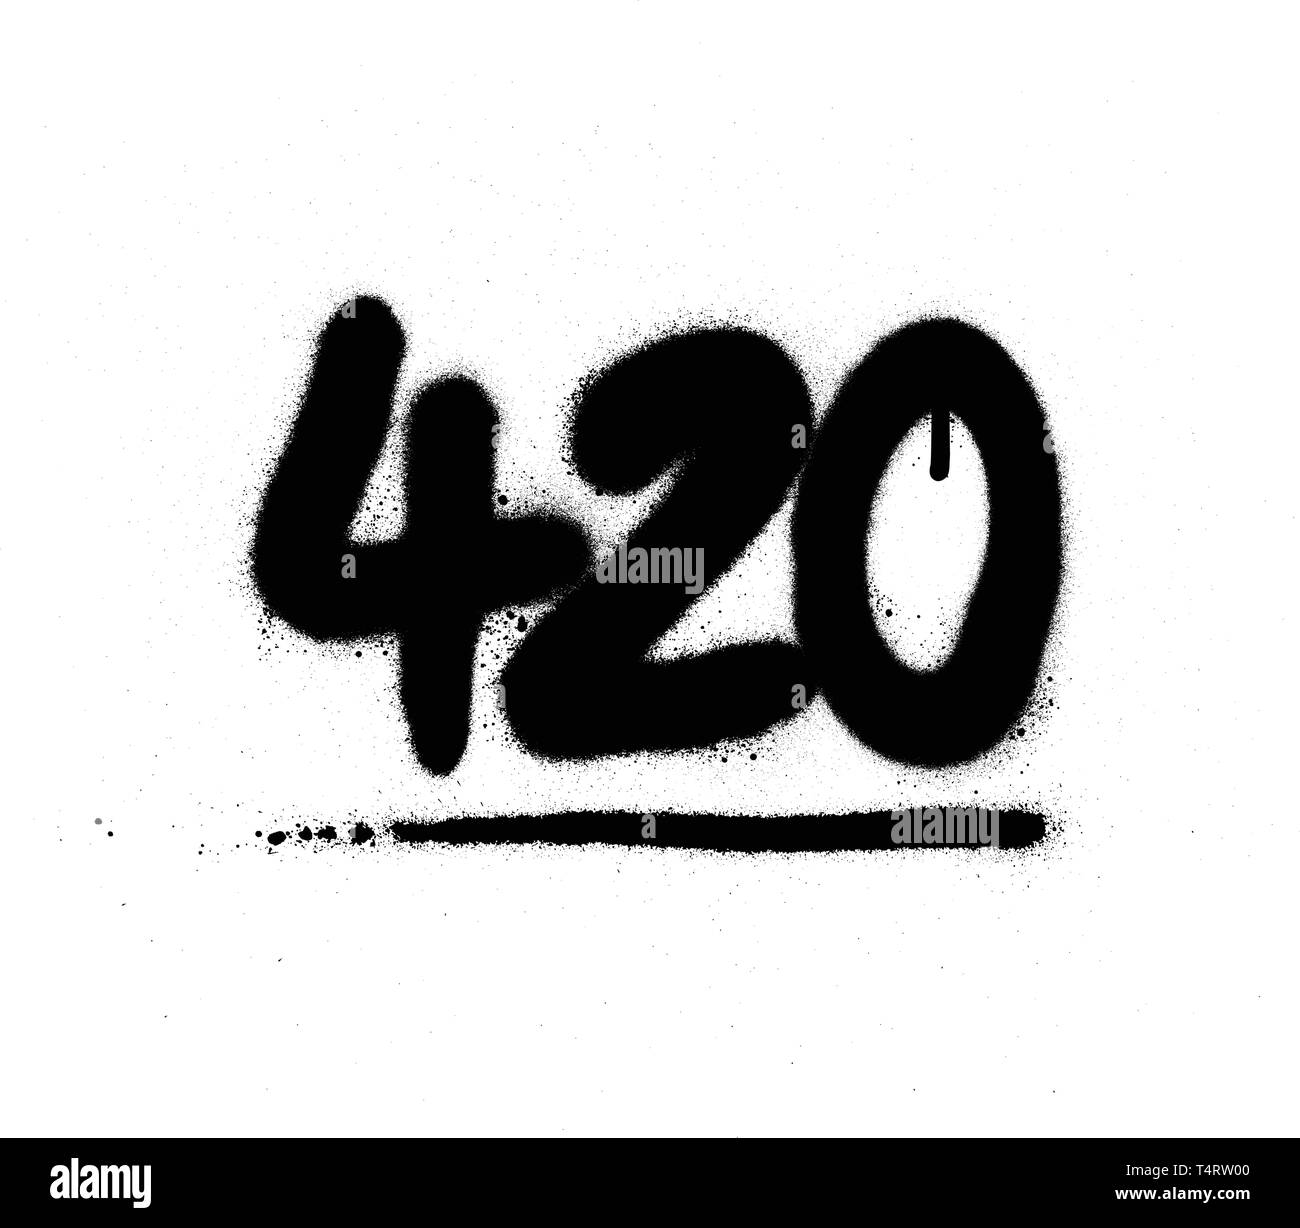 420 Stock Vector Images - Alamy